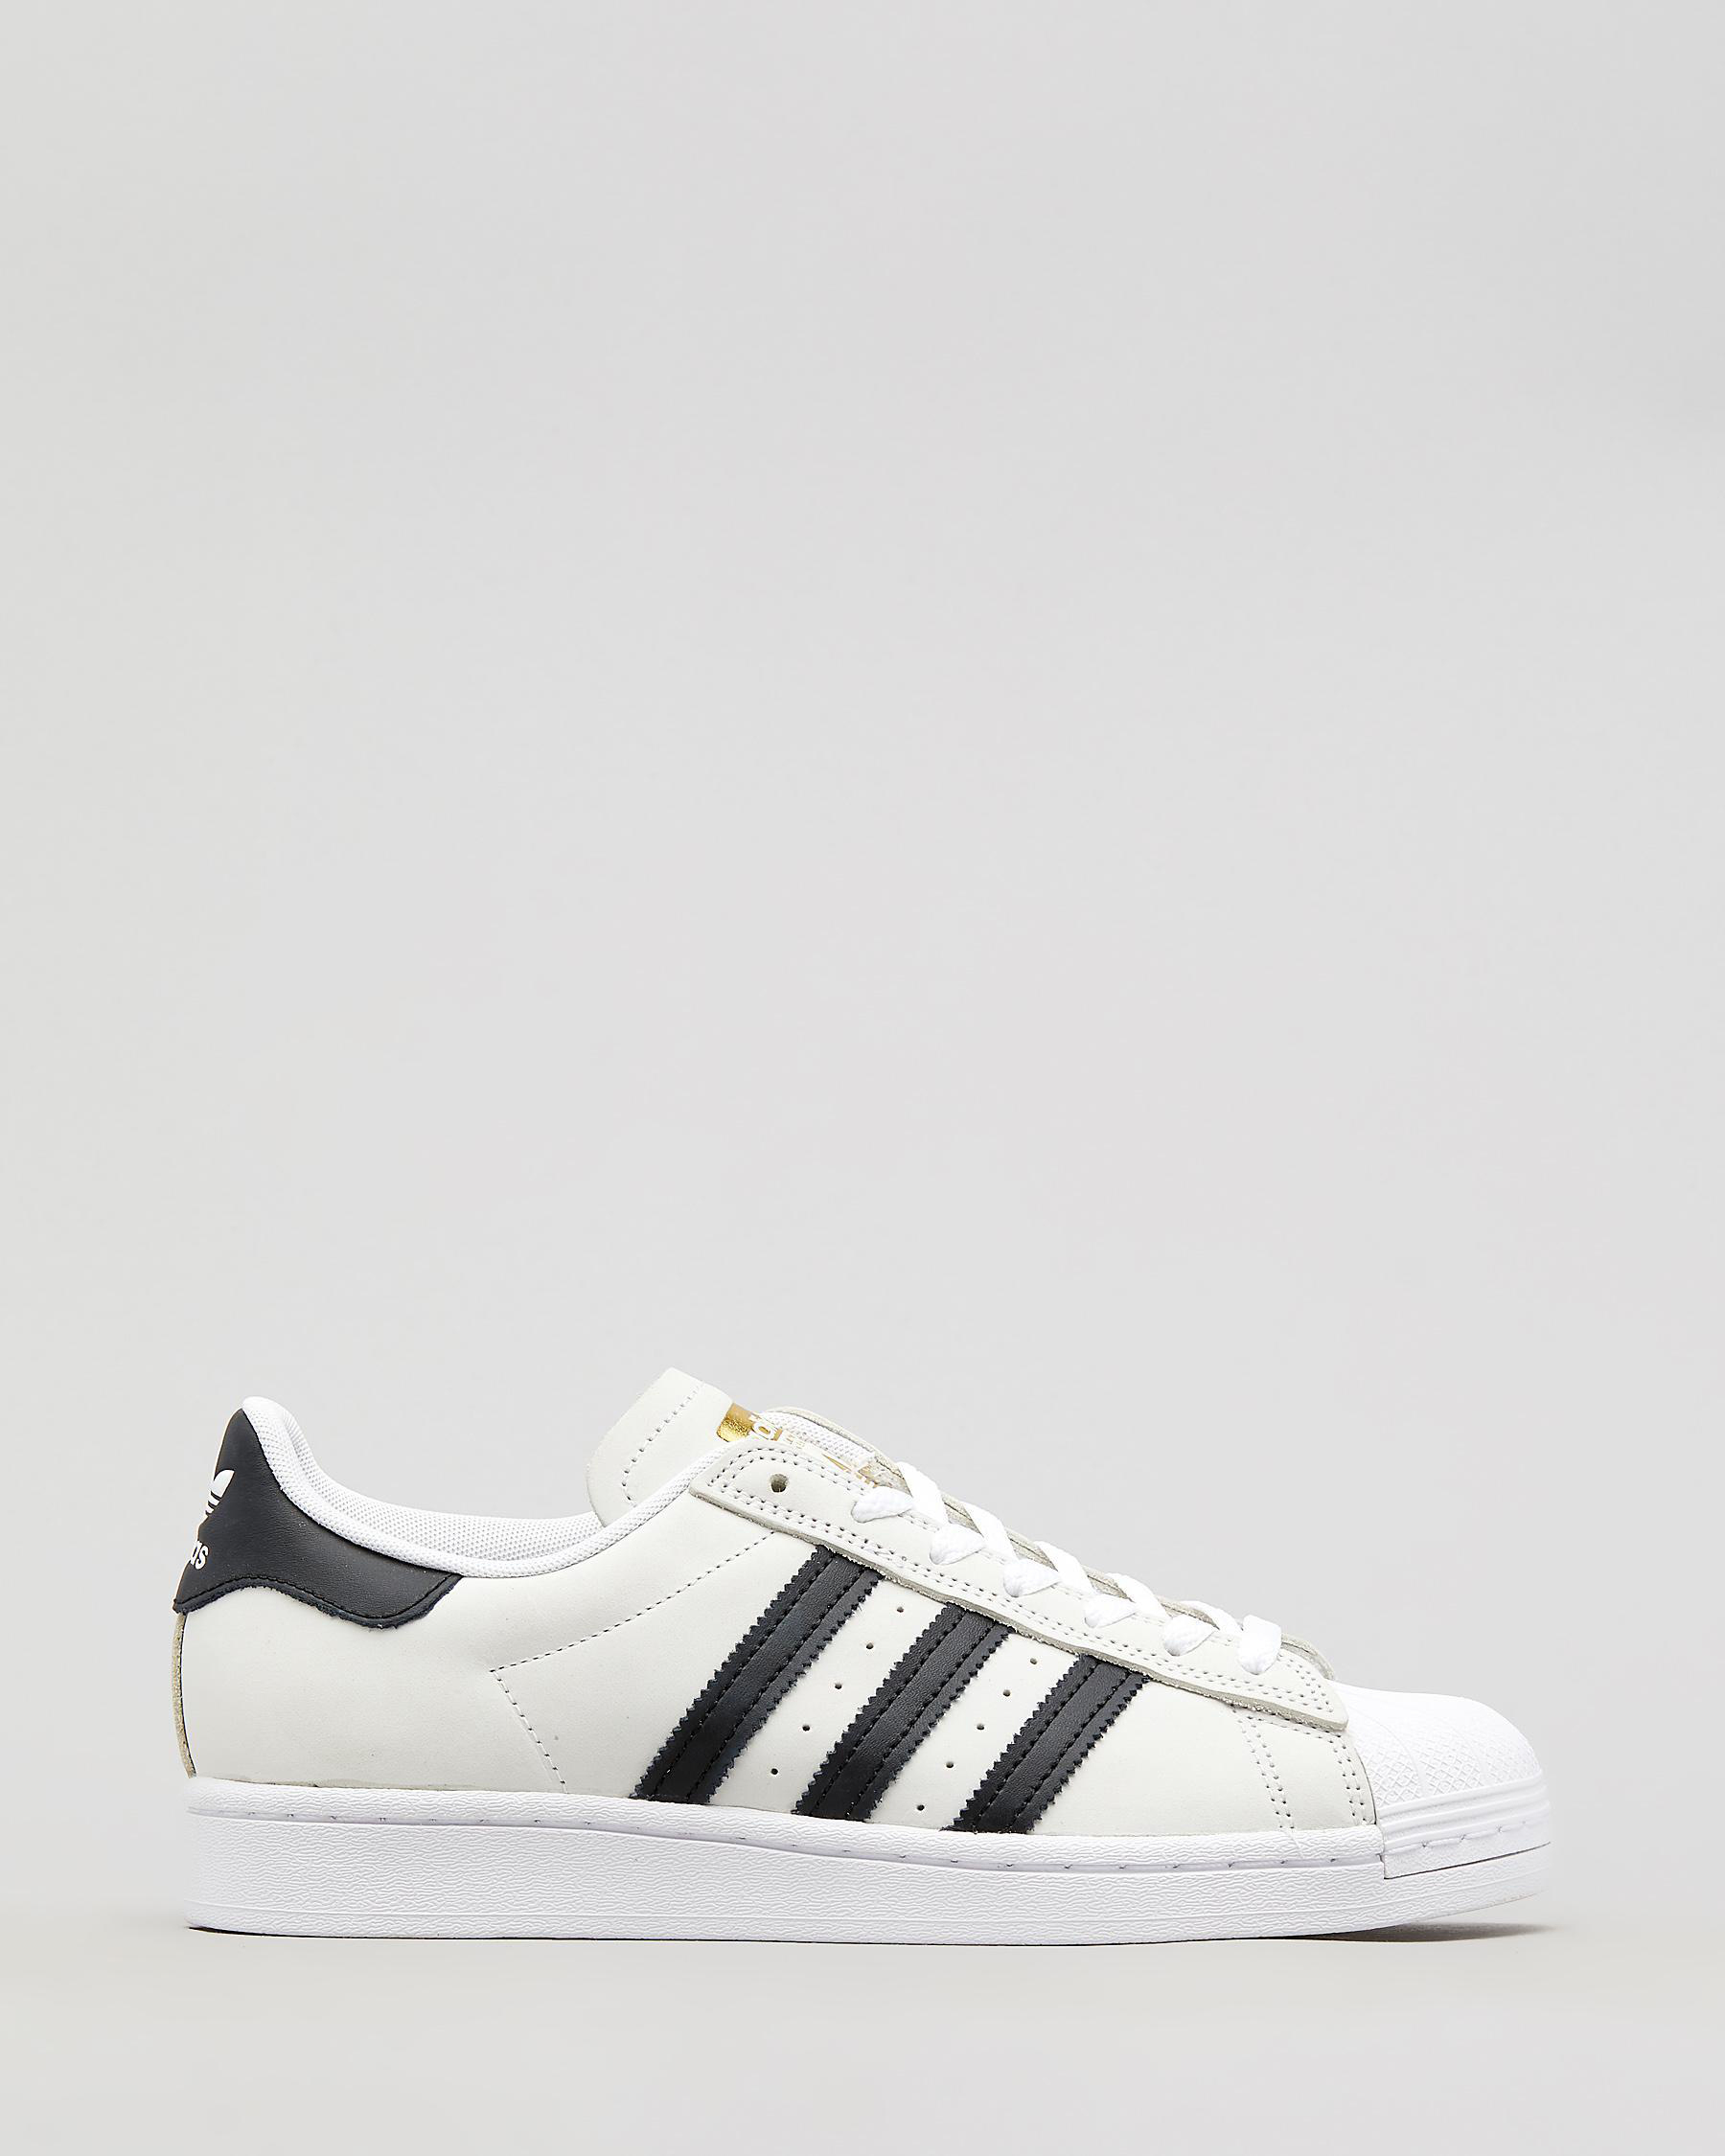 Adidas Superstar 505 Shoes In Ftwr White/core Black/gol - Fast Shipping ...